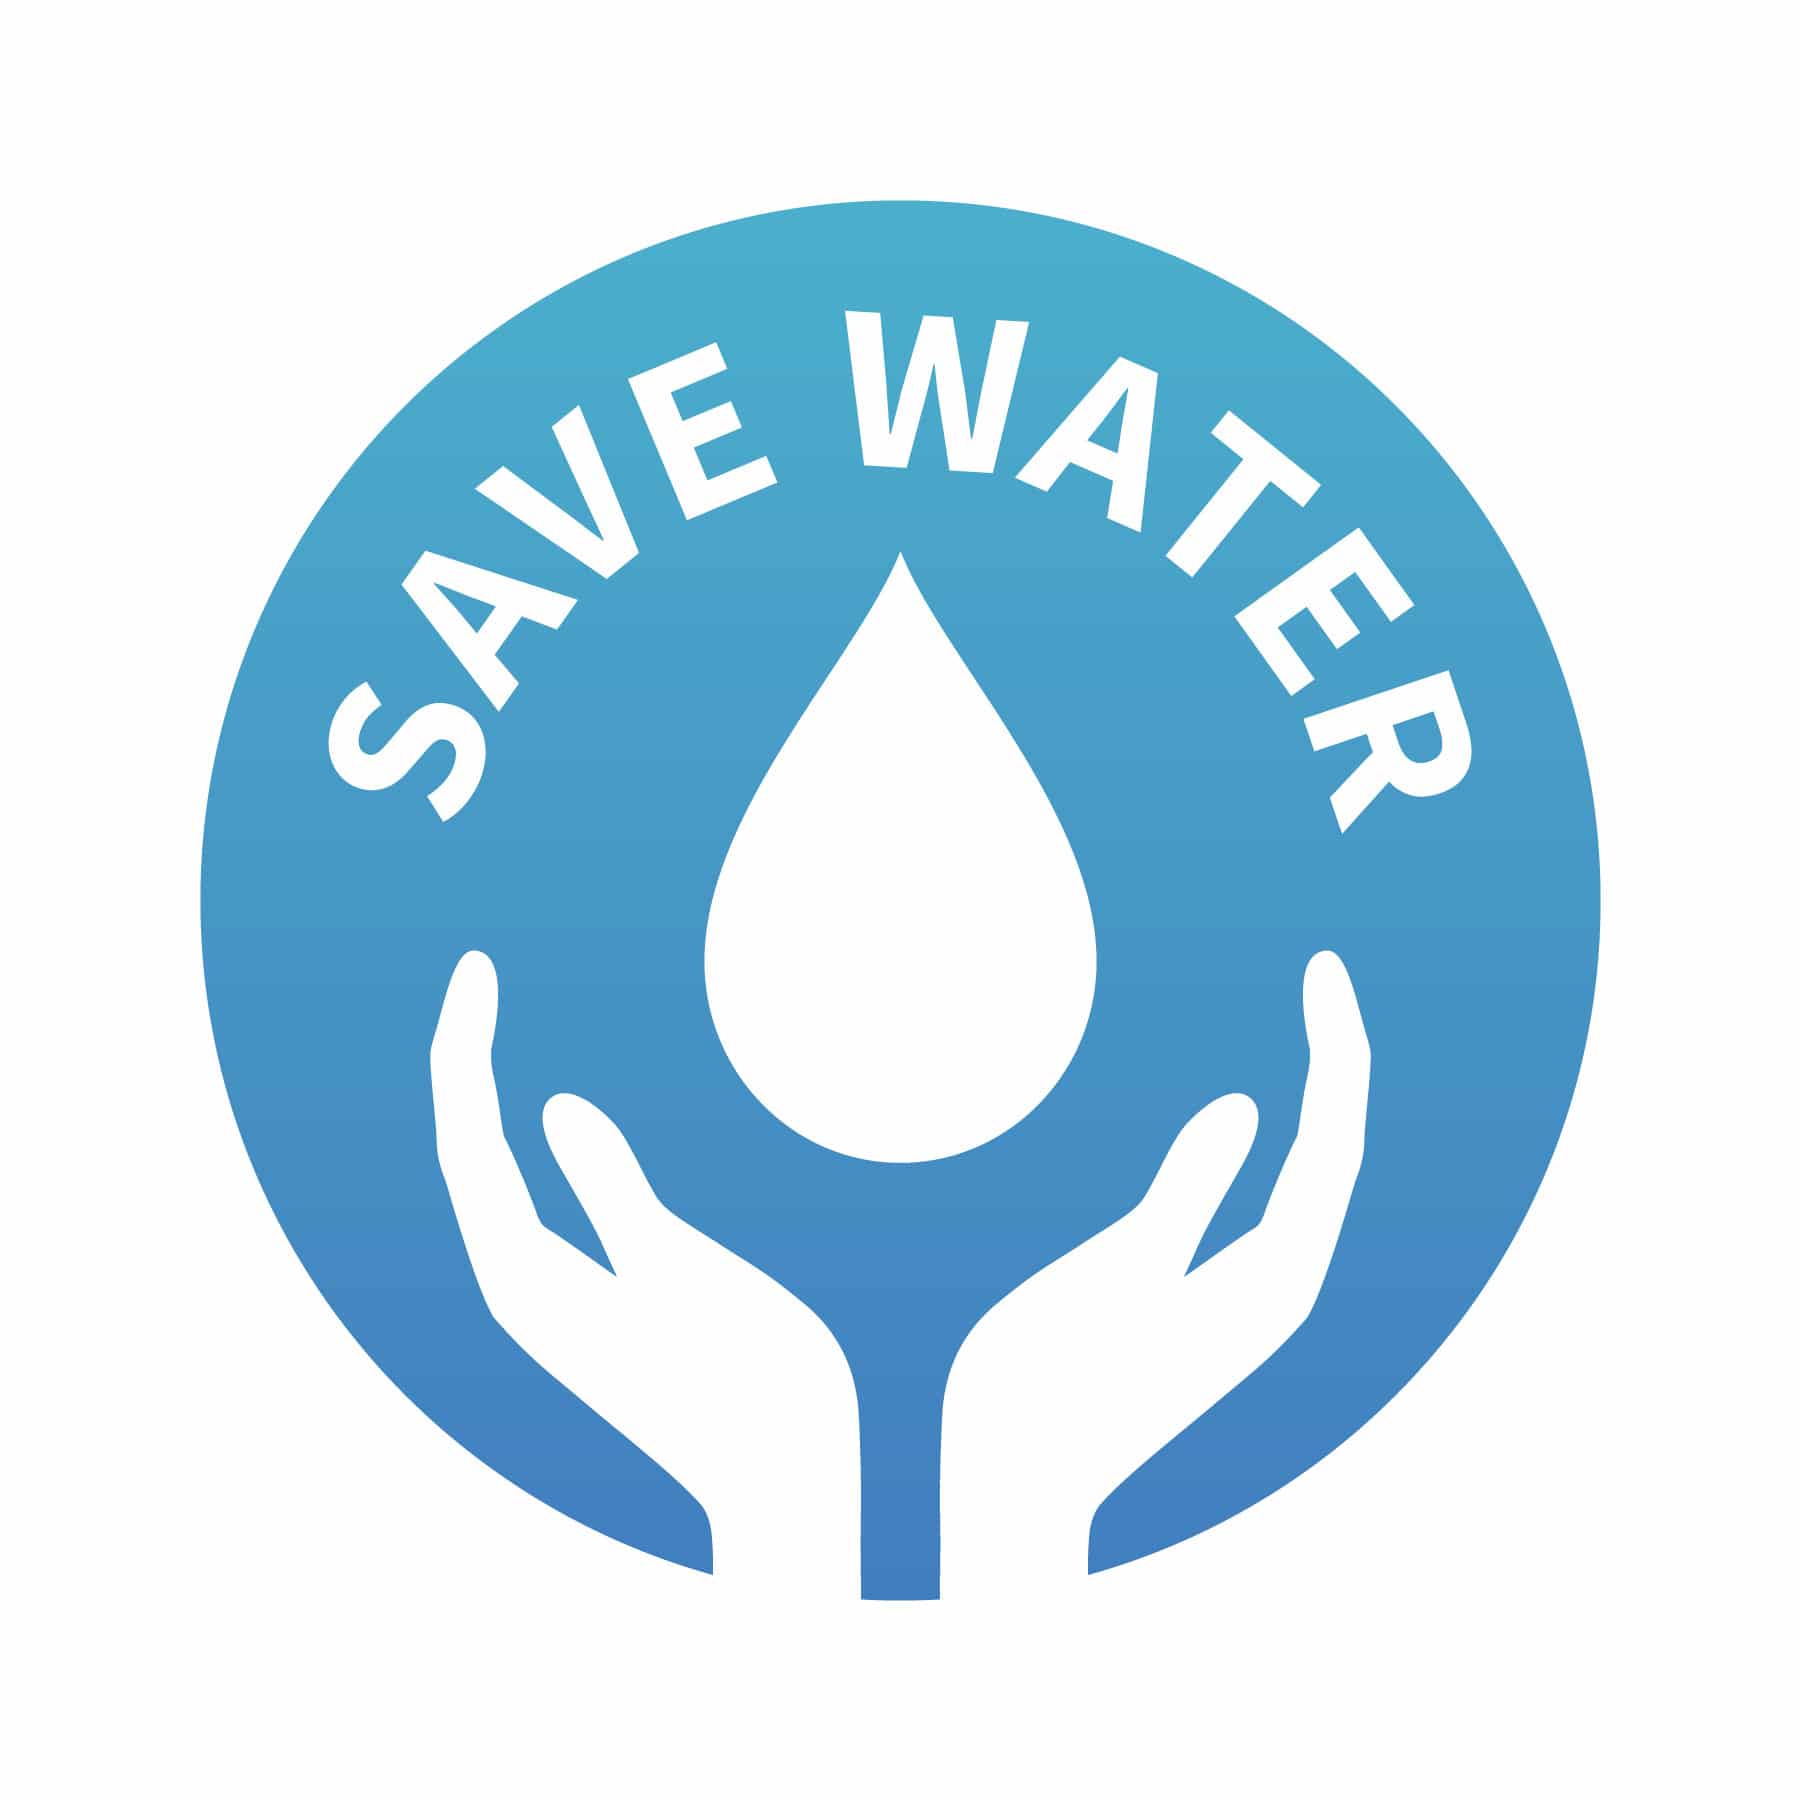 save water